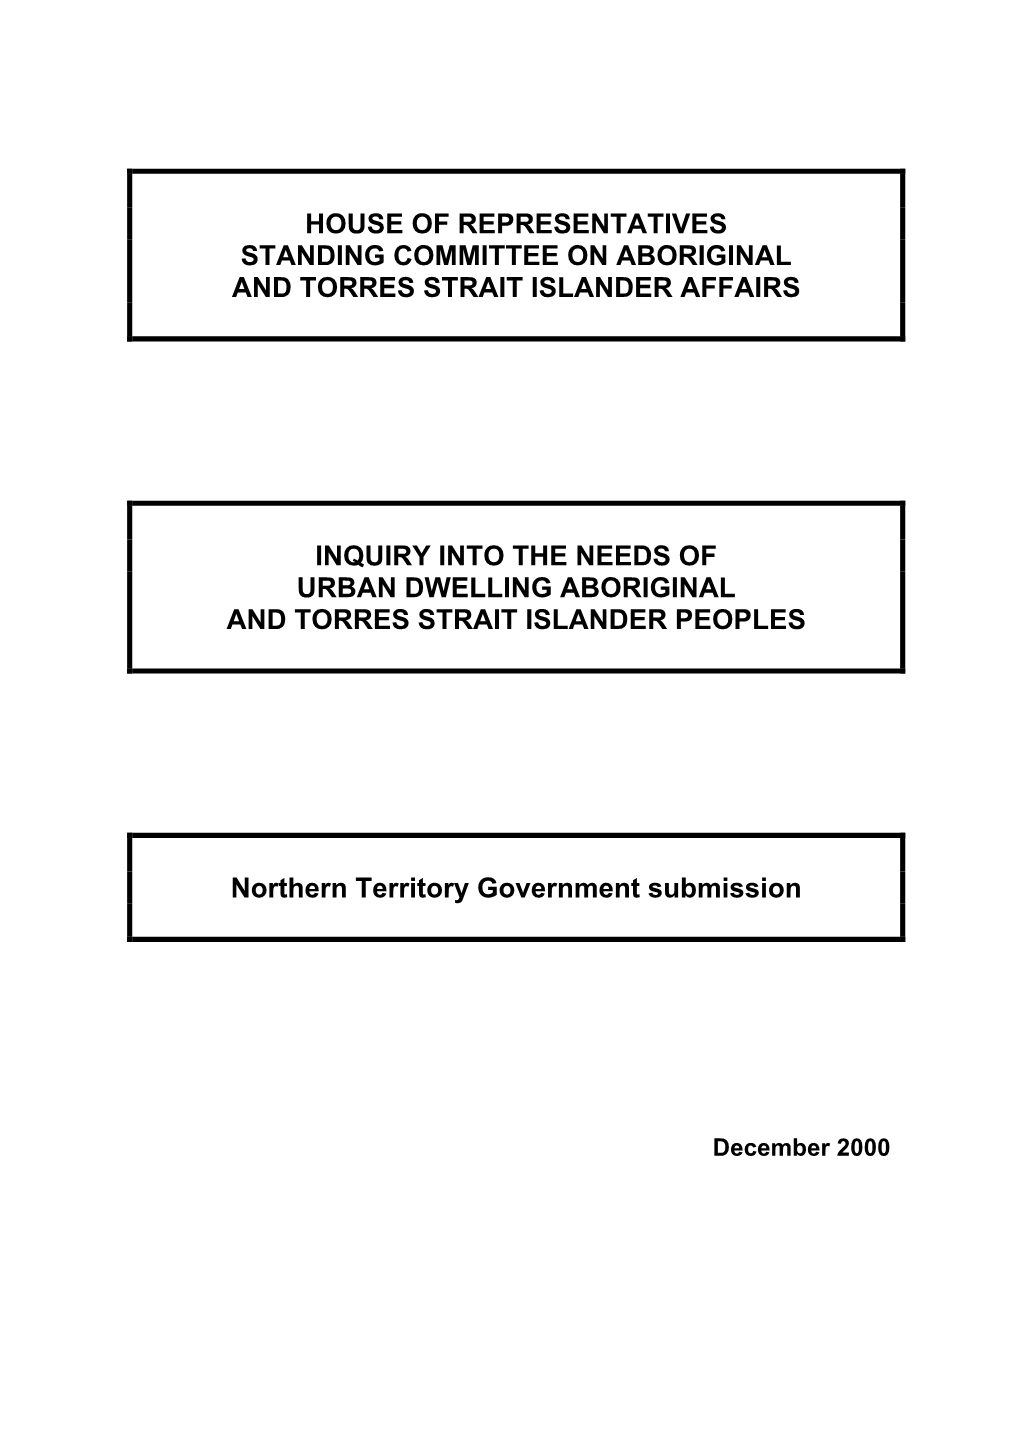 Northern Territory Government Submission